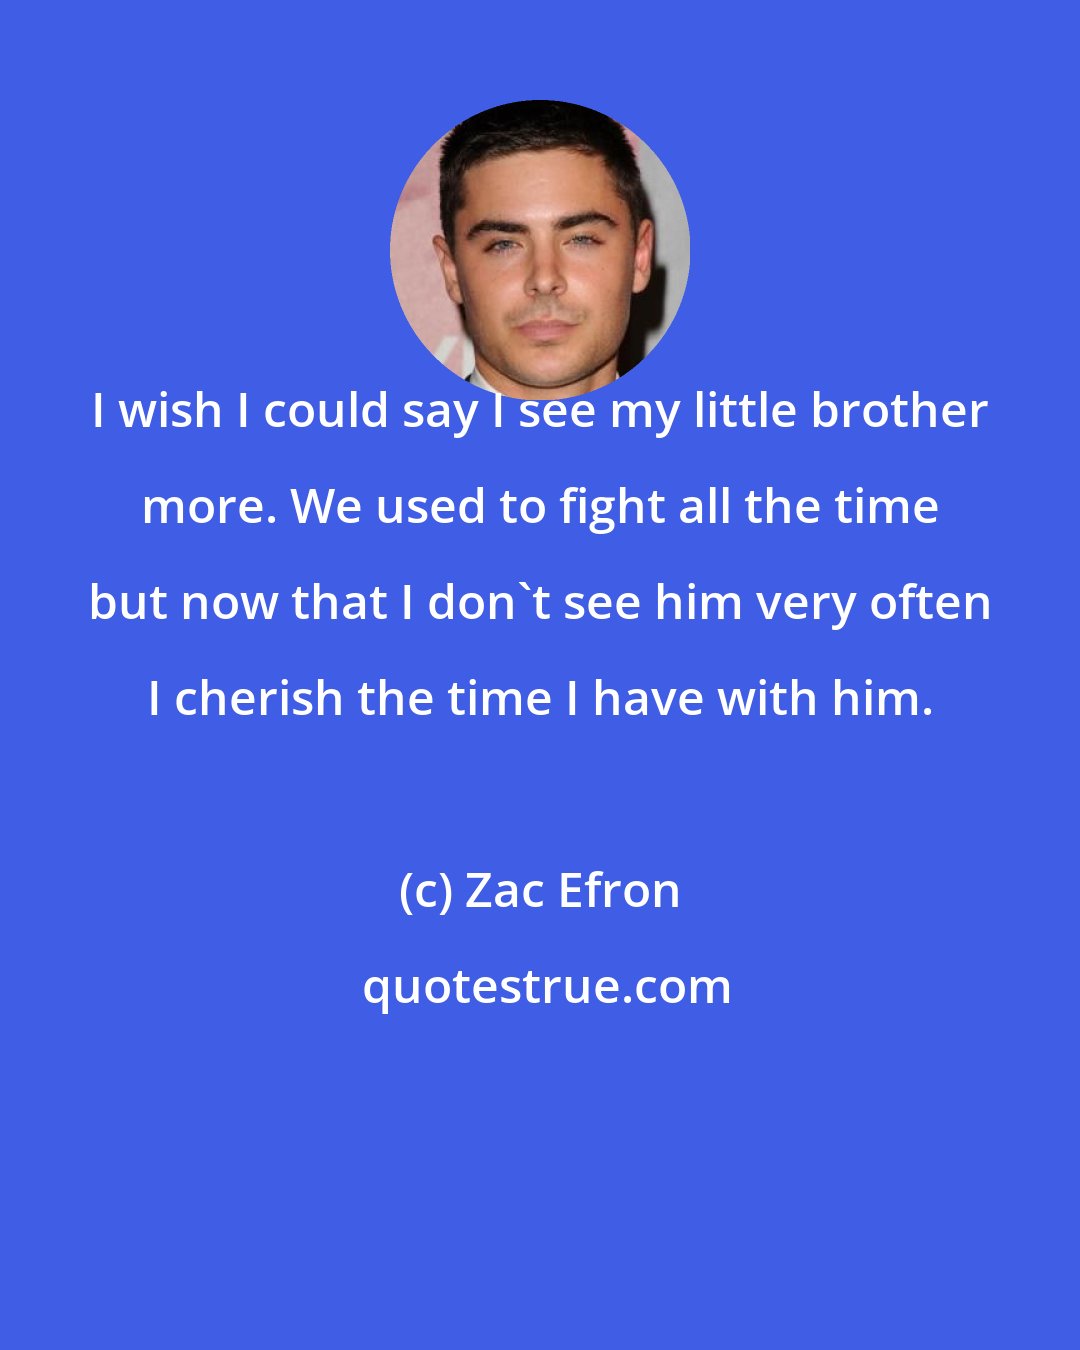 Zac Efron: I wish I could say I see my little brother more. We used to fight all the time but now that I don't see him very often I cherish the time I have with him.